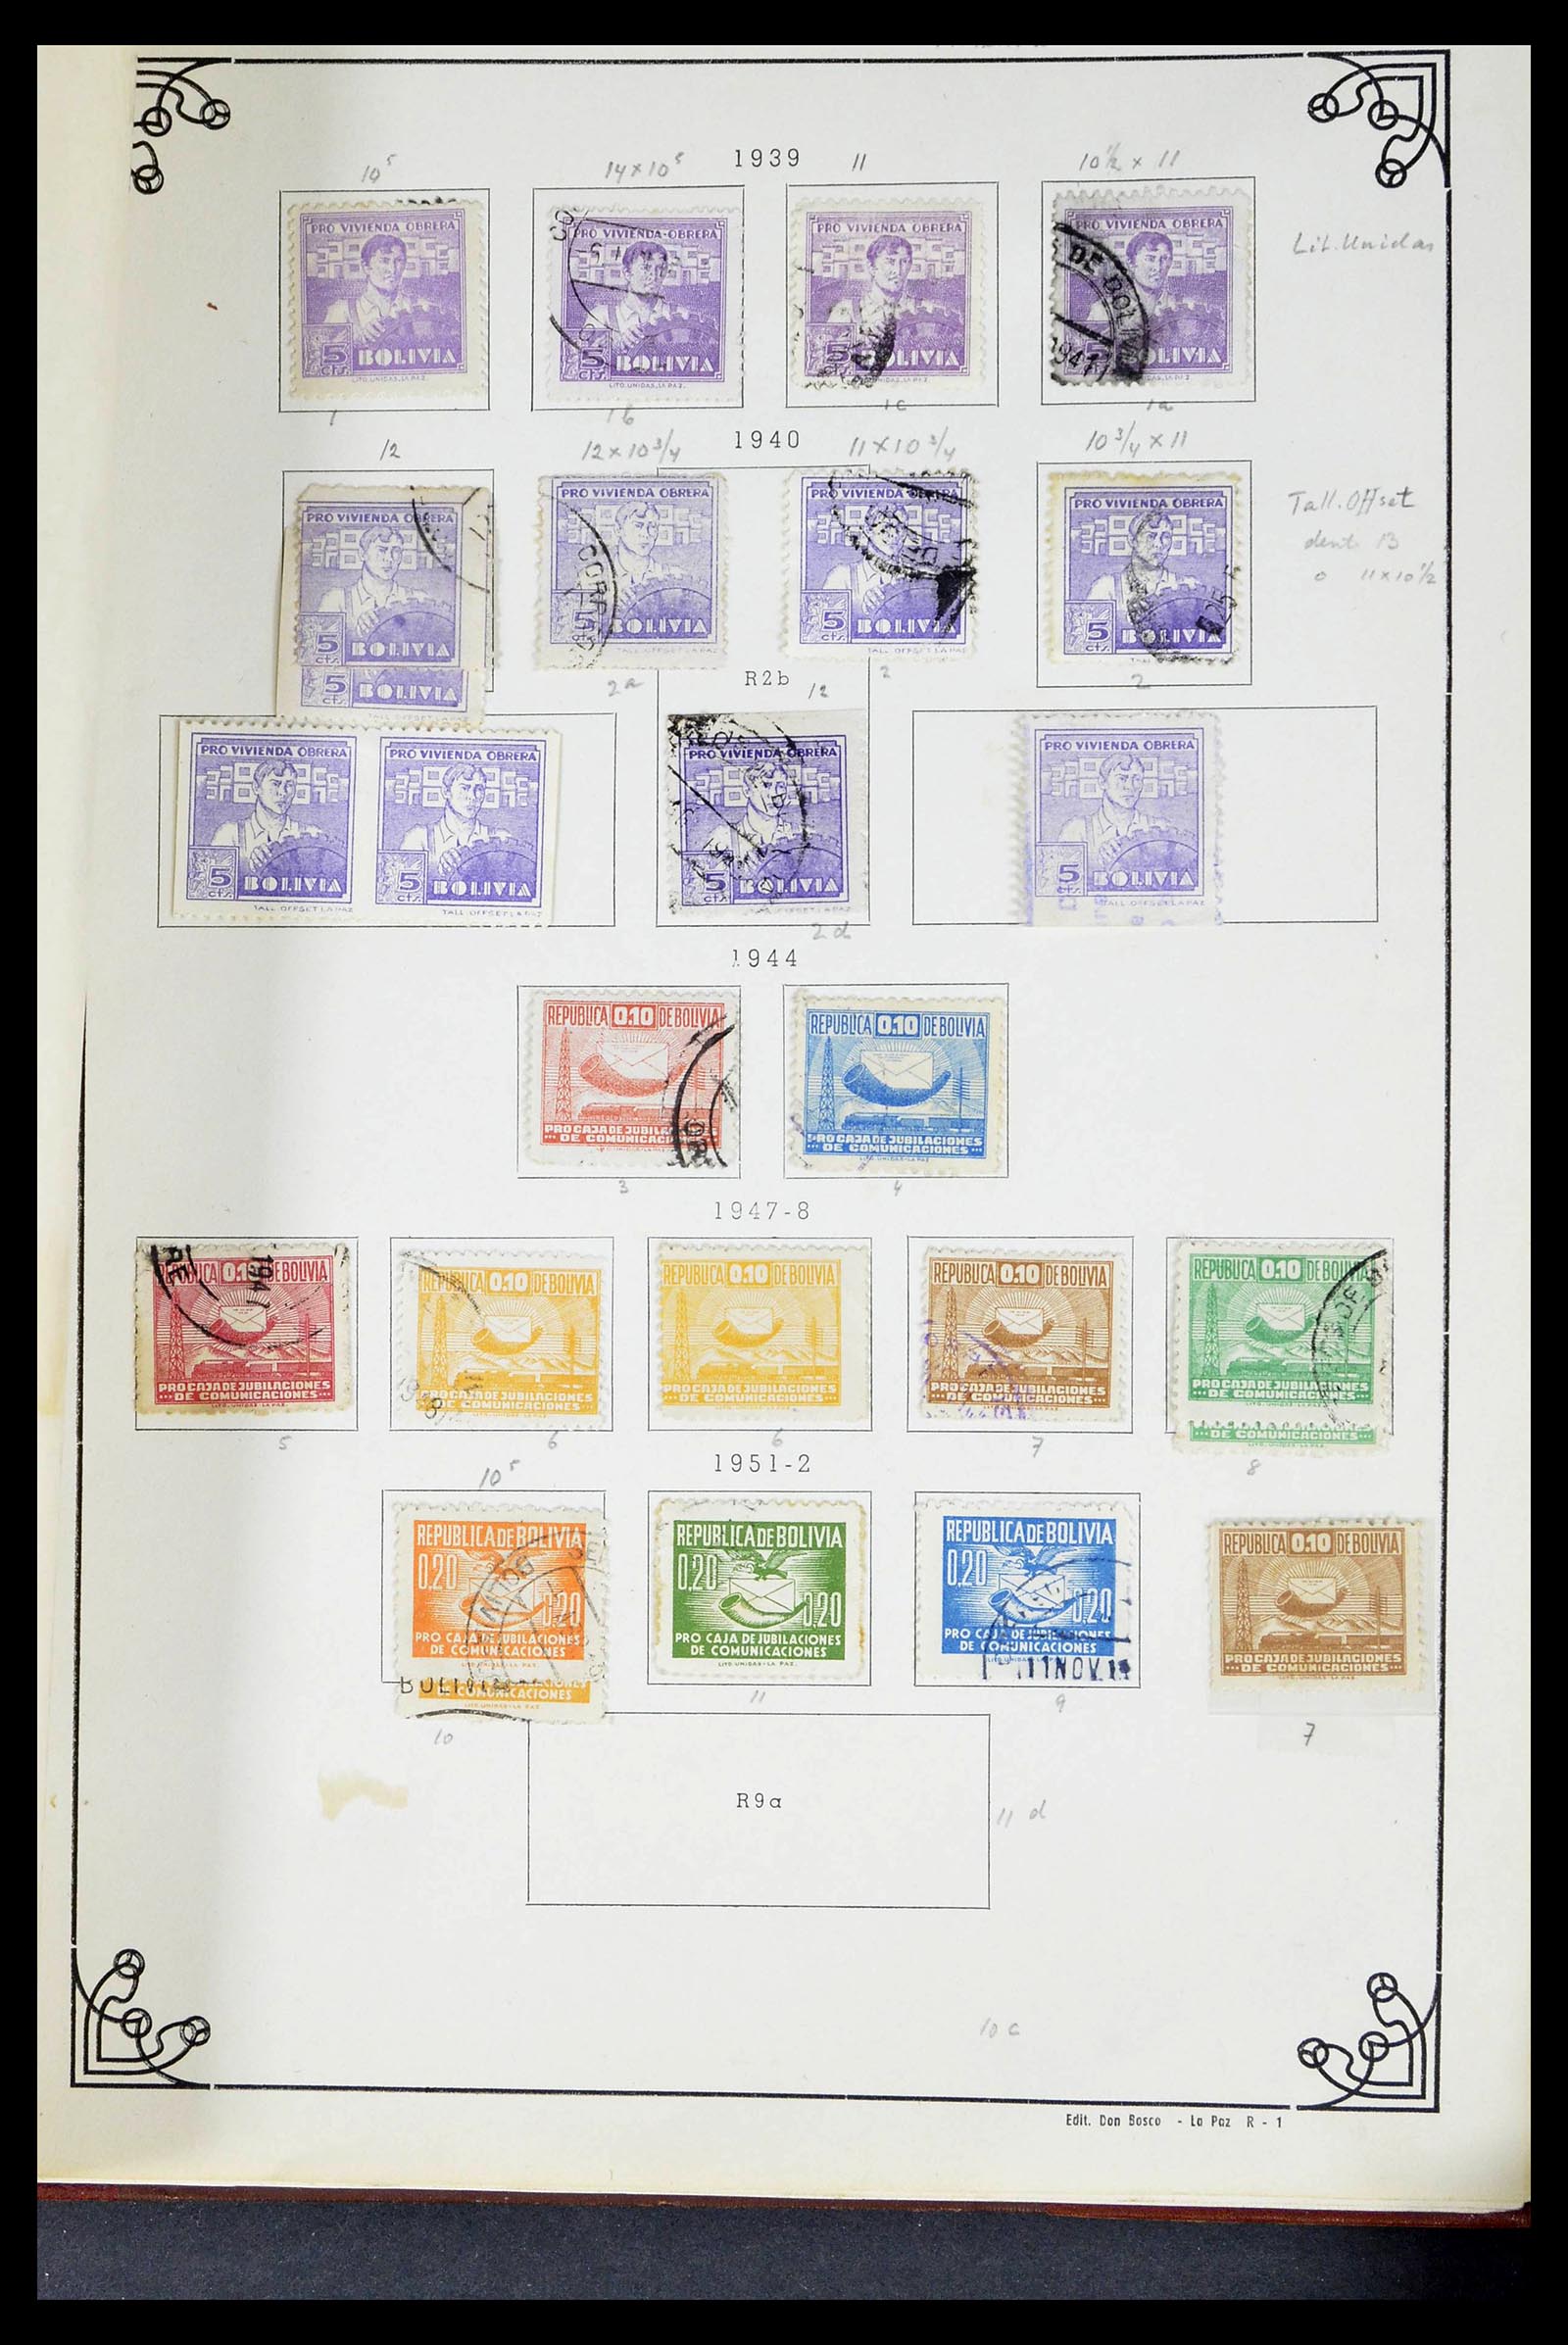 39224 0060 - Stamp collection 39224 Bolivia 1849-1955.